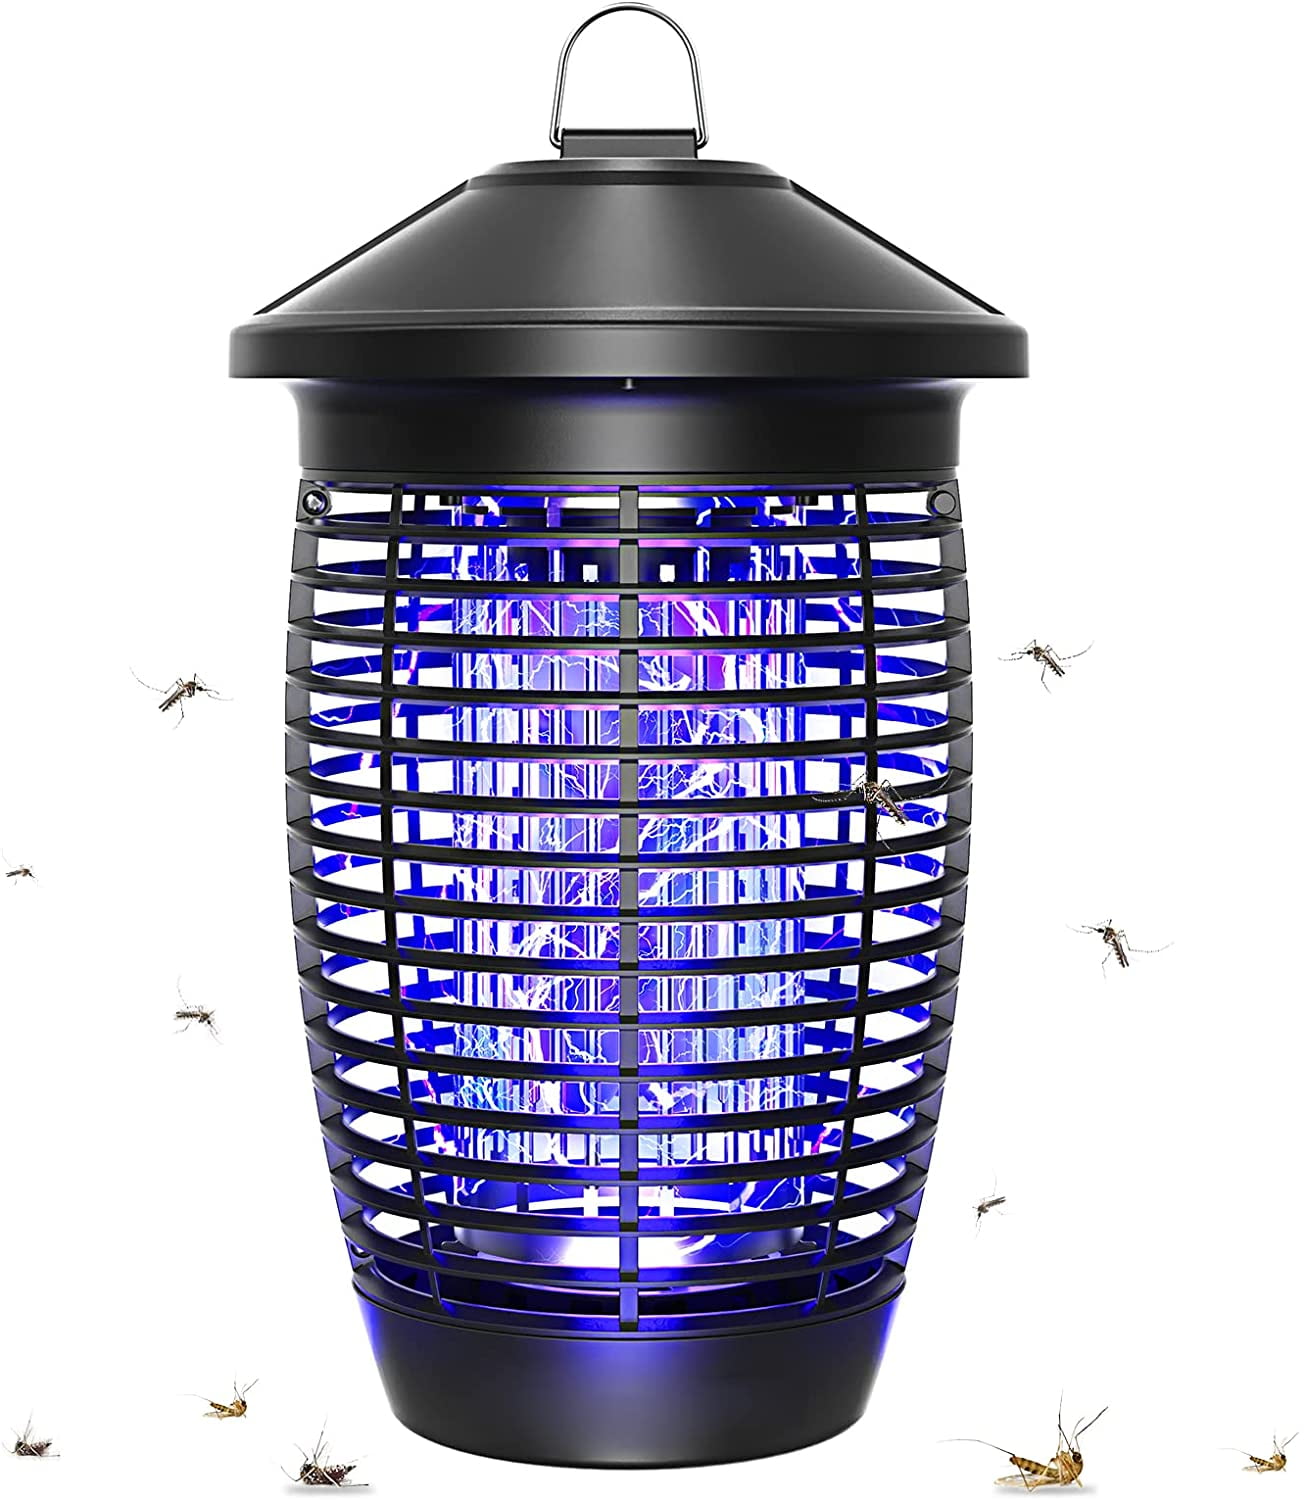 Waterproof 110V 20W Mosquito Insect Killer Bug Zapper Lamp 